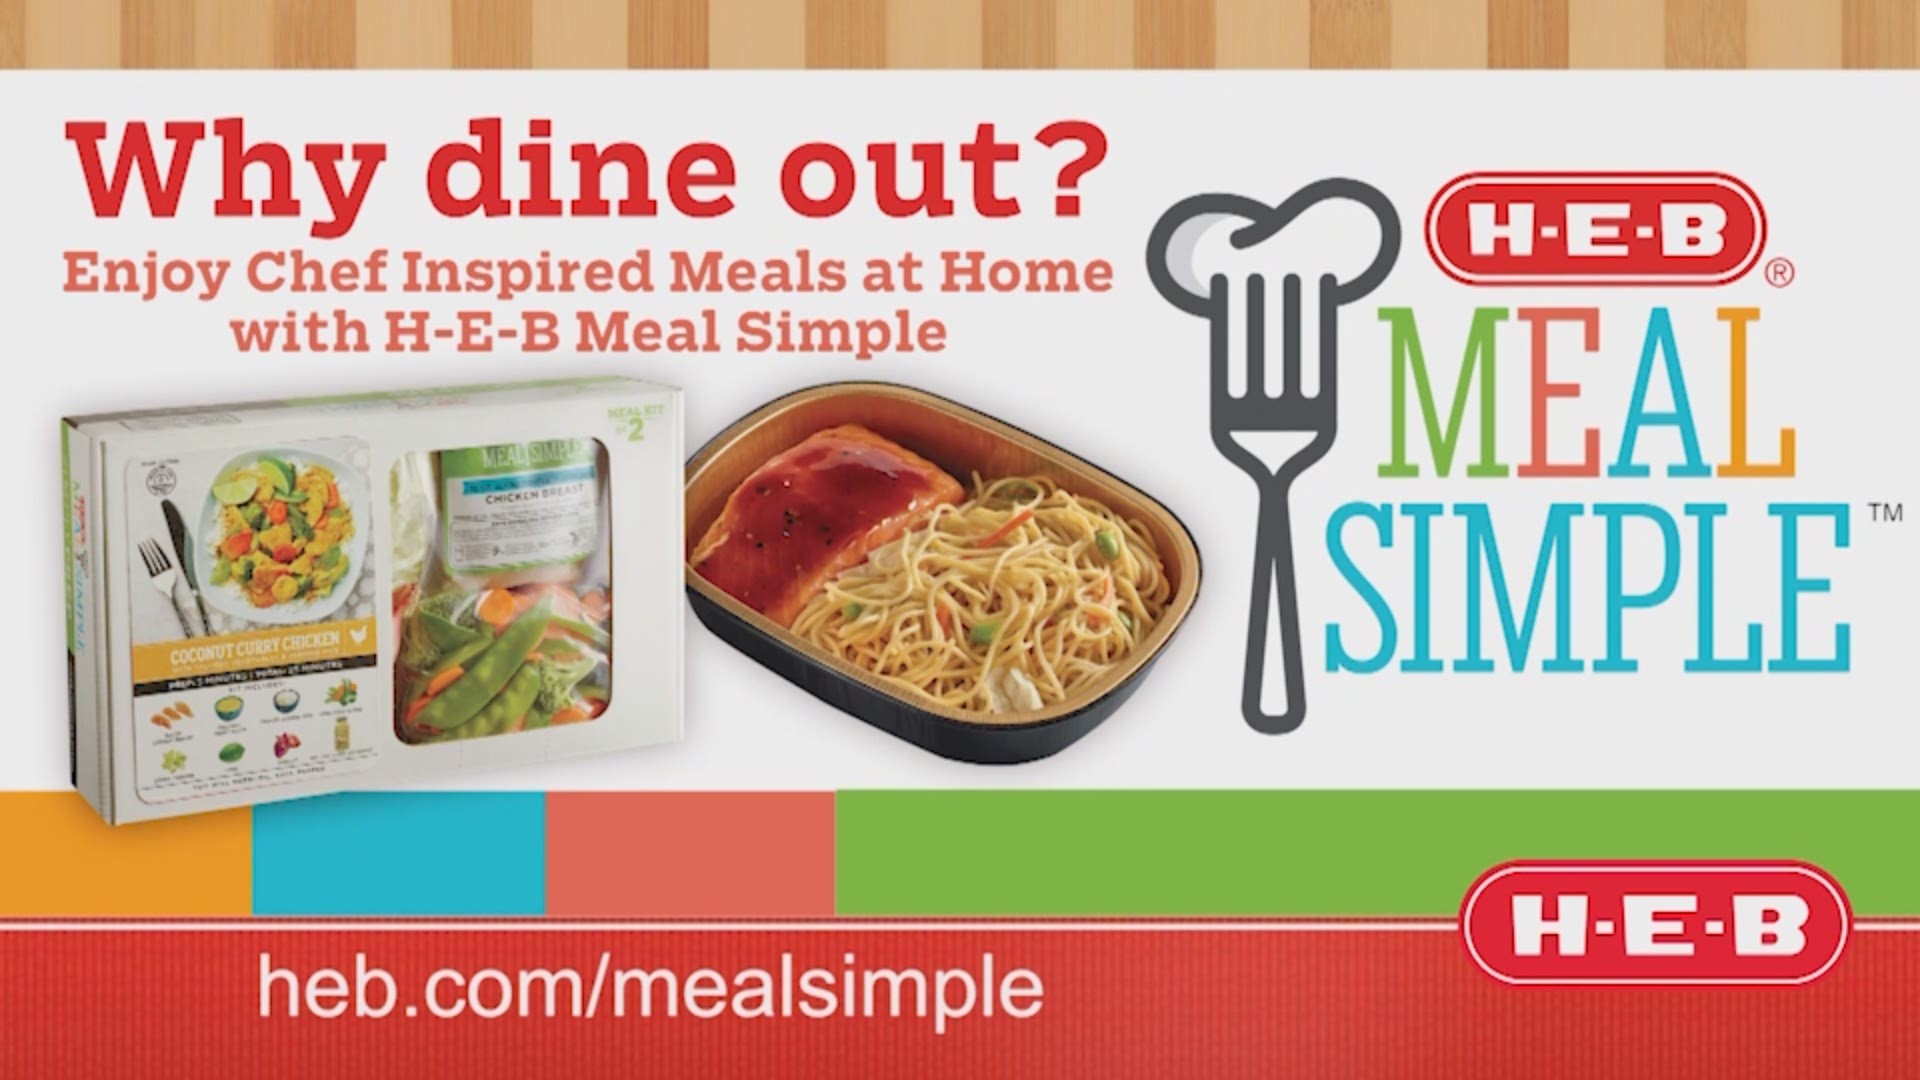 HEB: Simple Meal